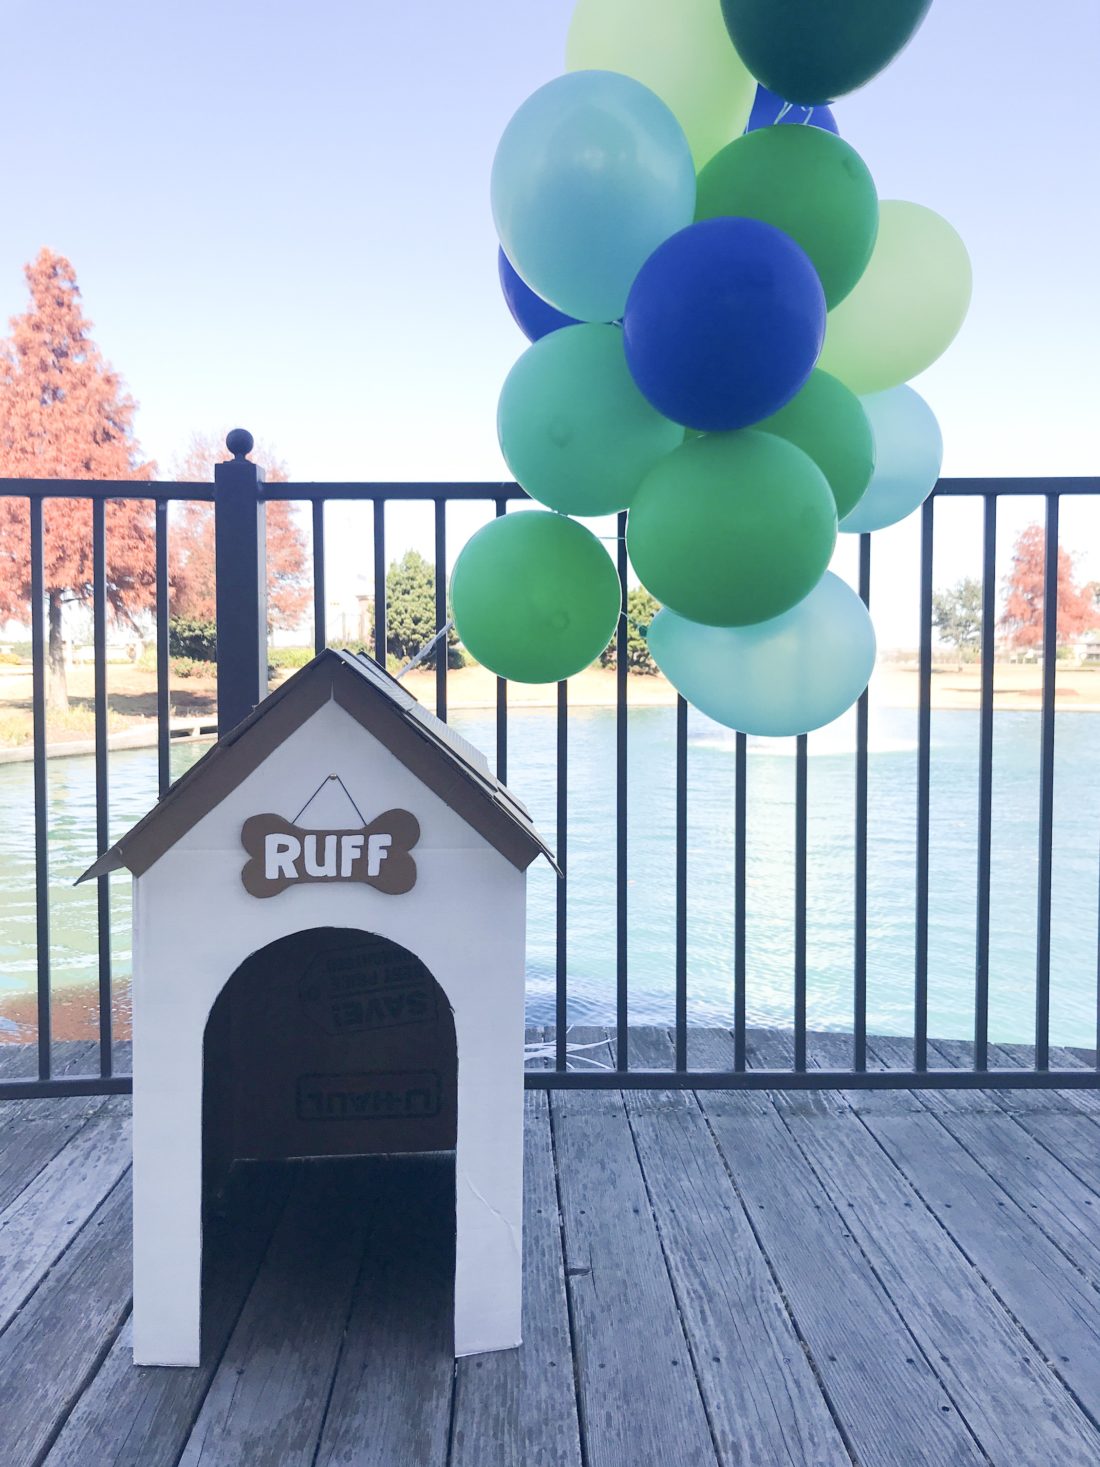 cardboard dog house, dog themed birthday party decor, blue and green balloons 